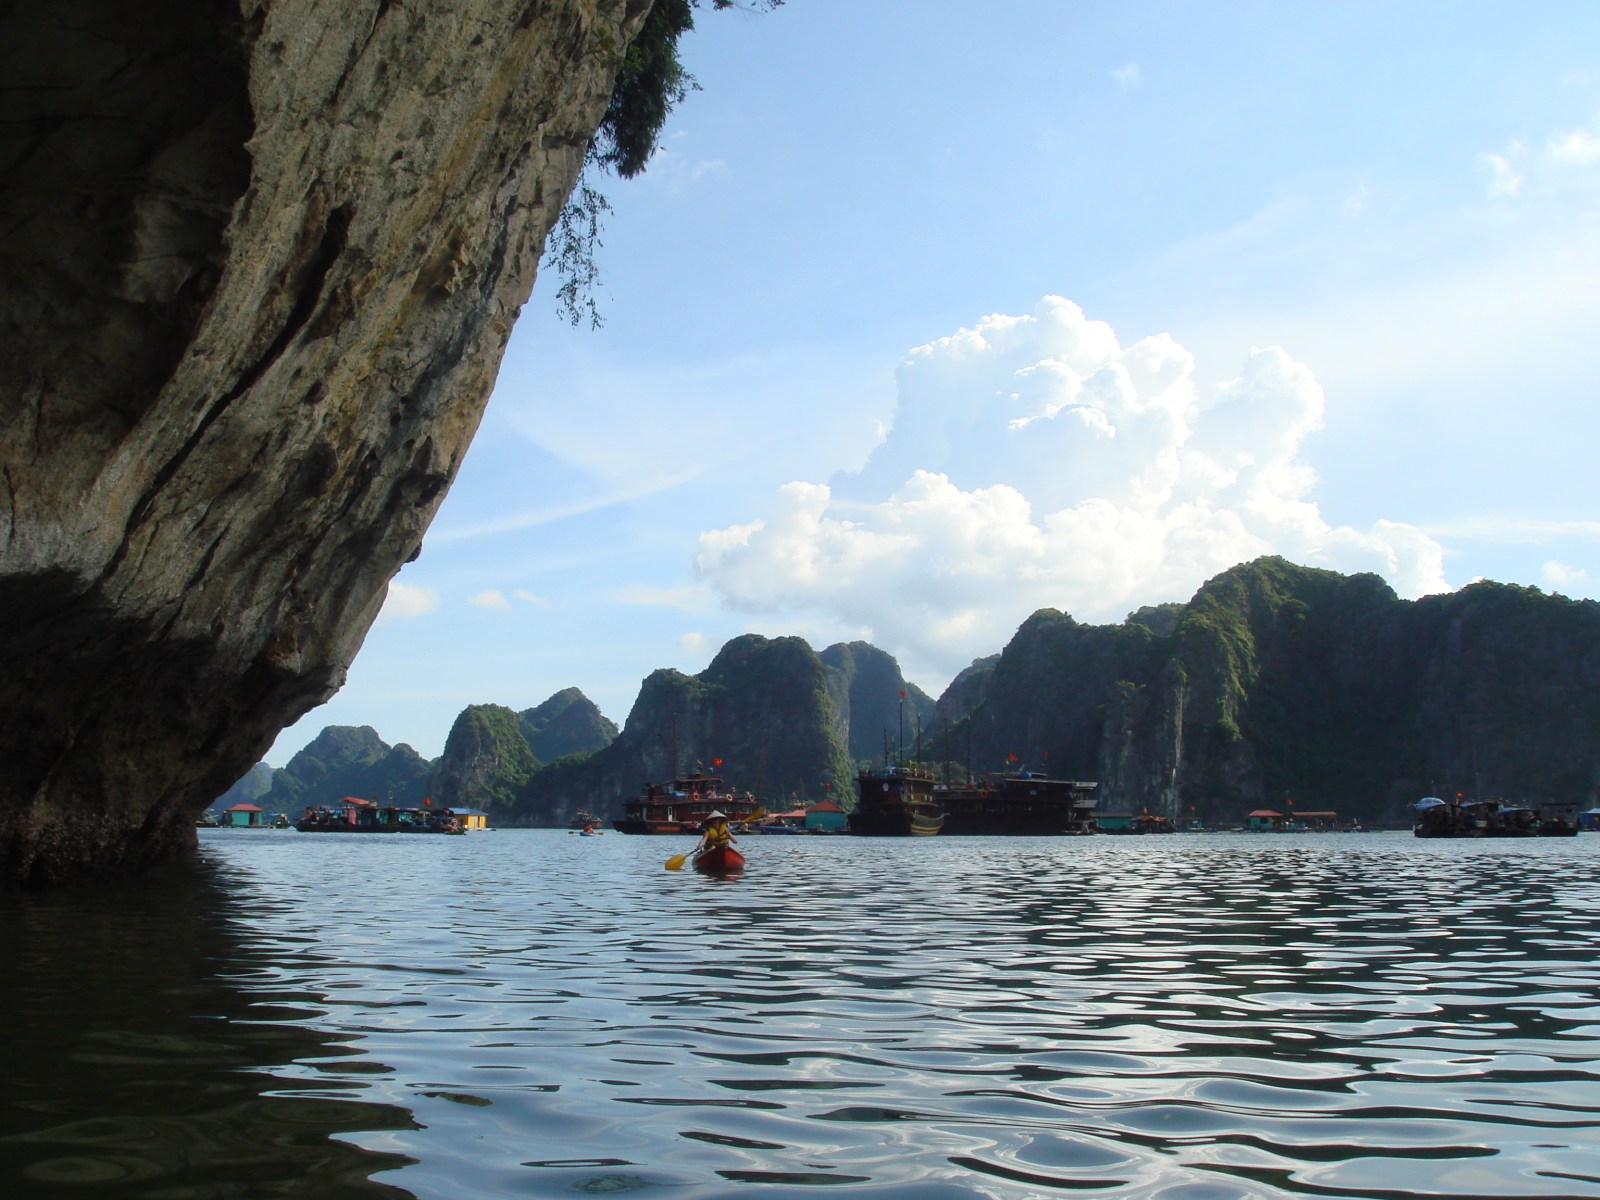 An overnight boat trip through HaLong Bay – The Bay of the Descending Dragon